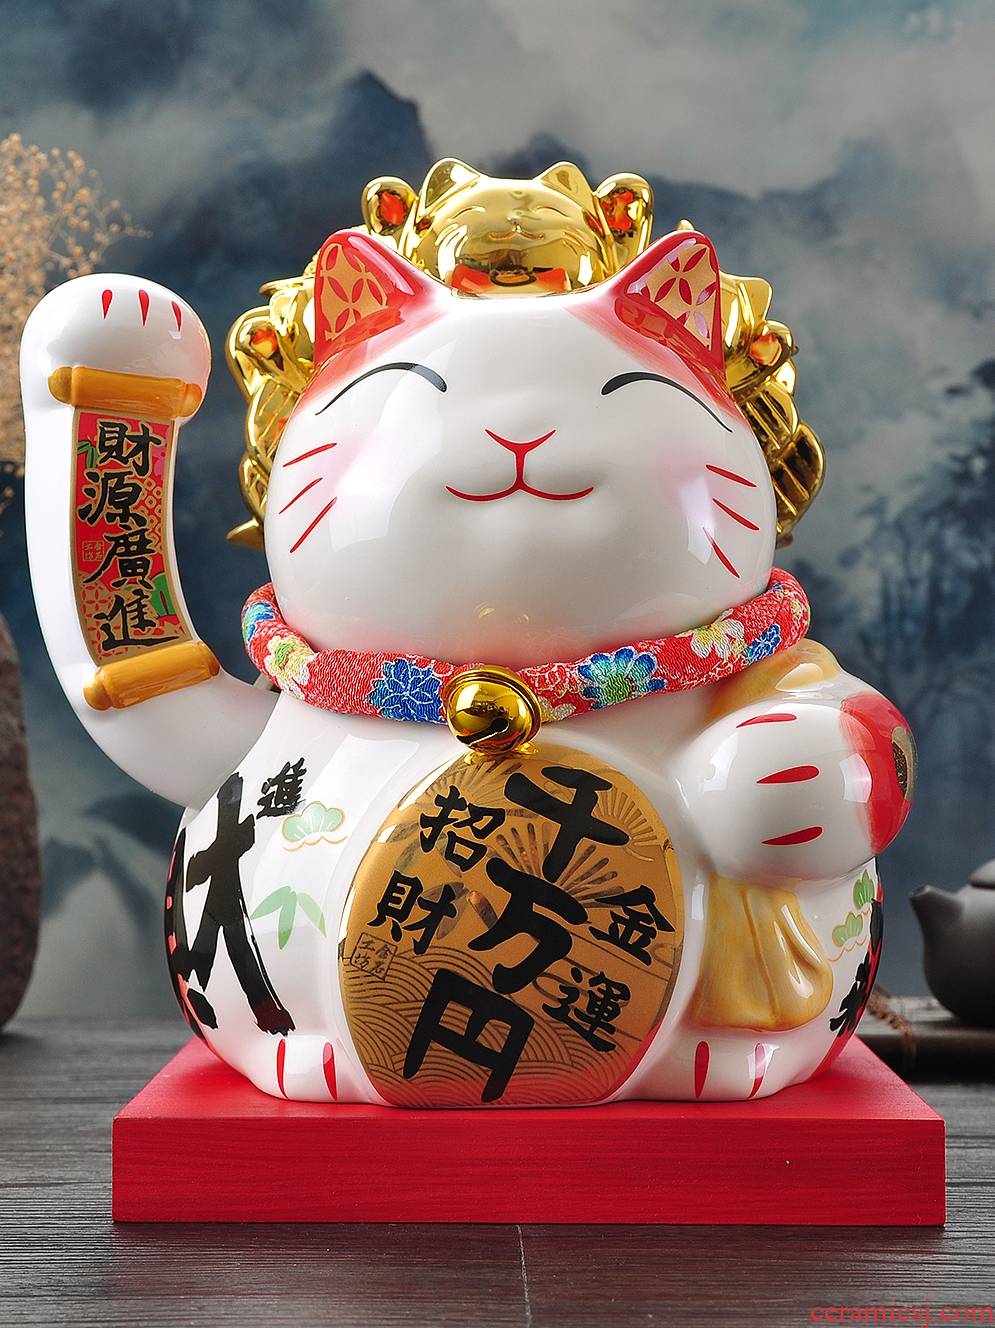 Golden electric wave plutus cat furnishing articles store checkout decoration large ceramic storage tank opening gifts